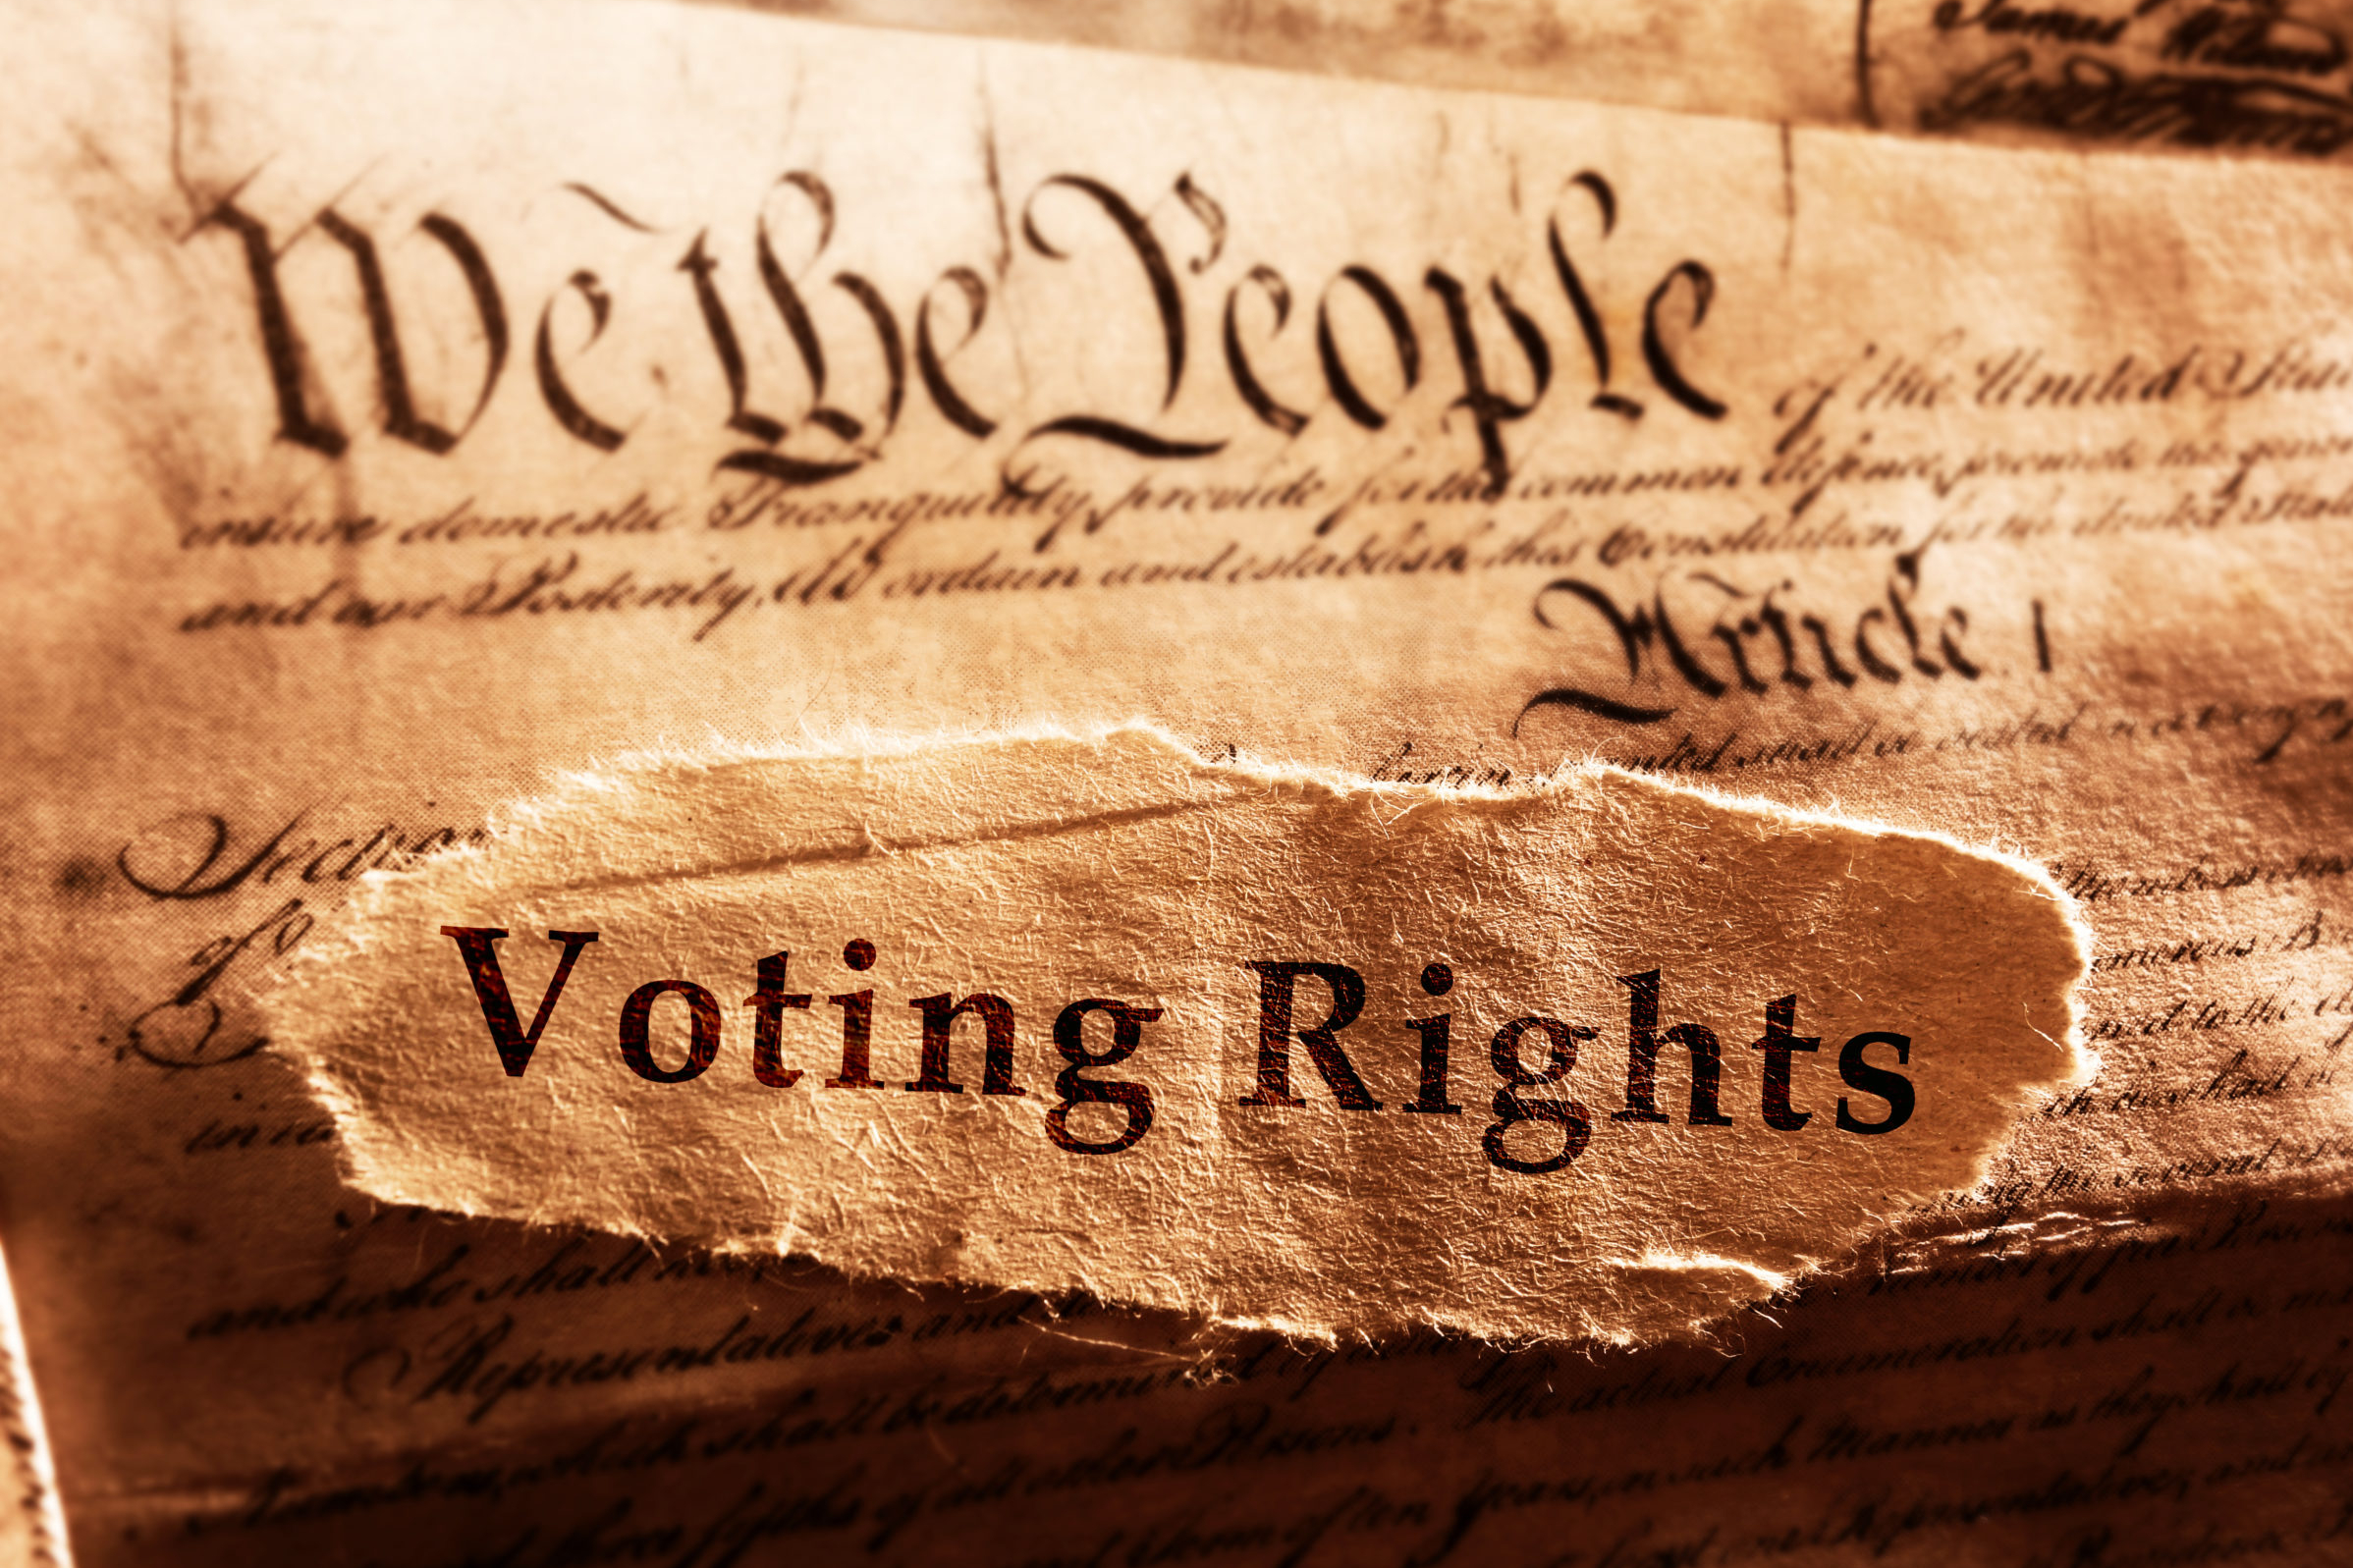 Voting Rights text on United States Constitution